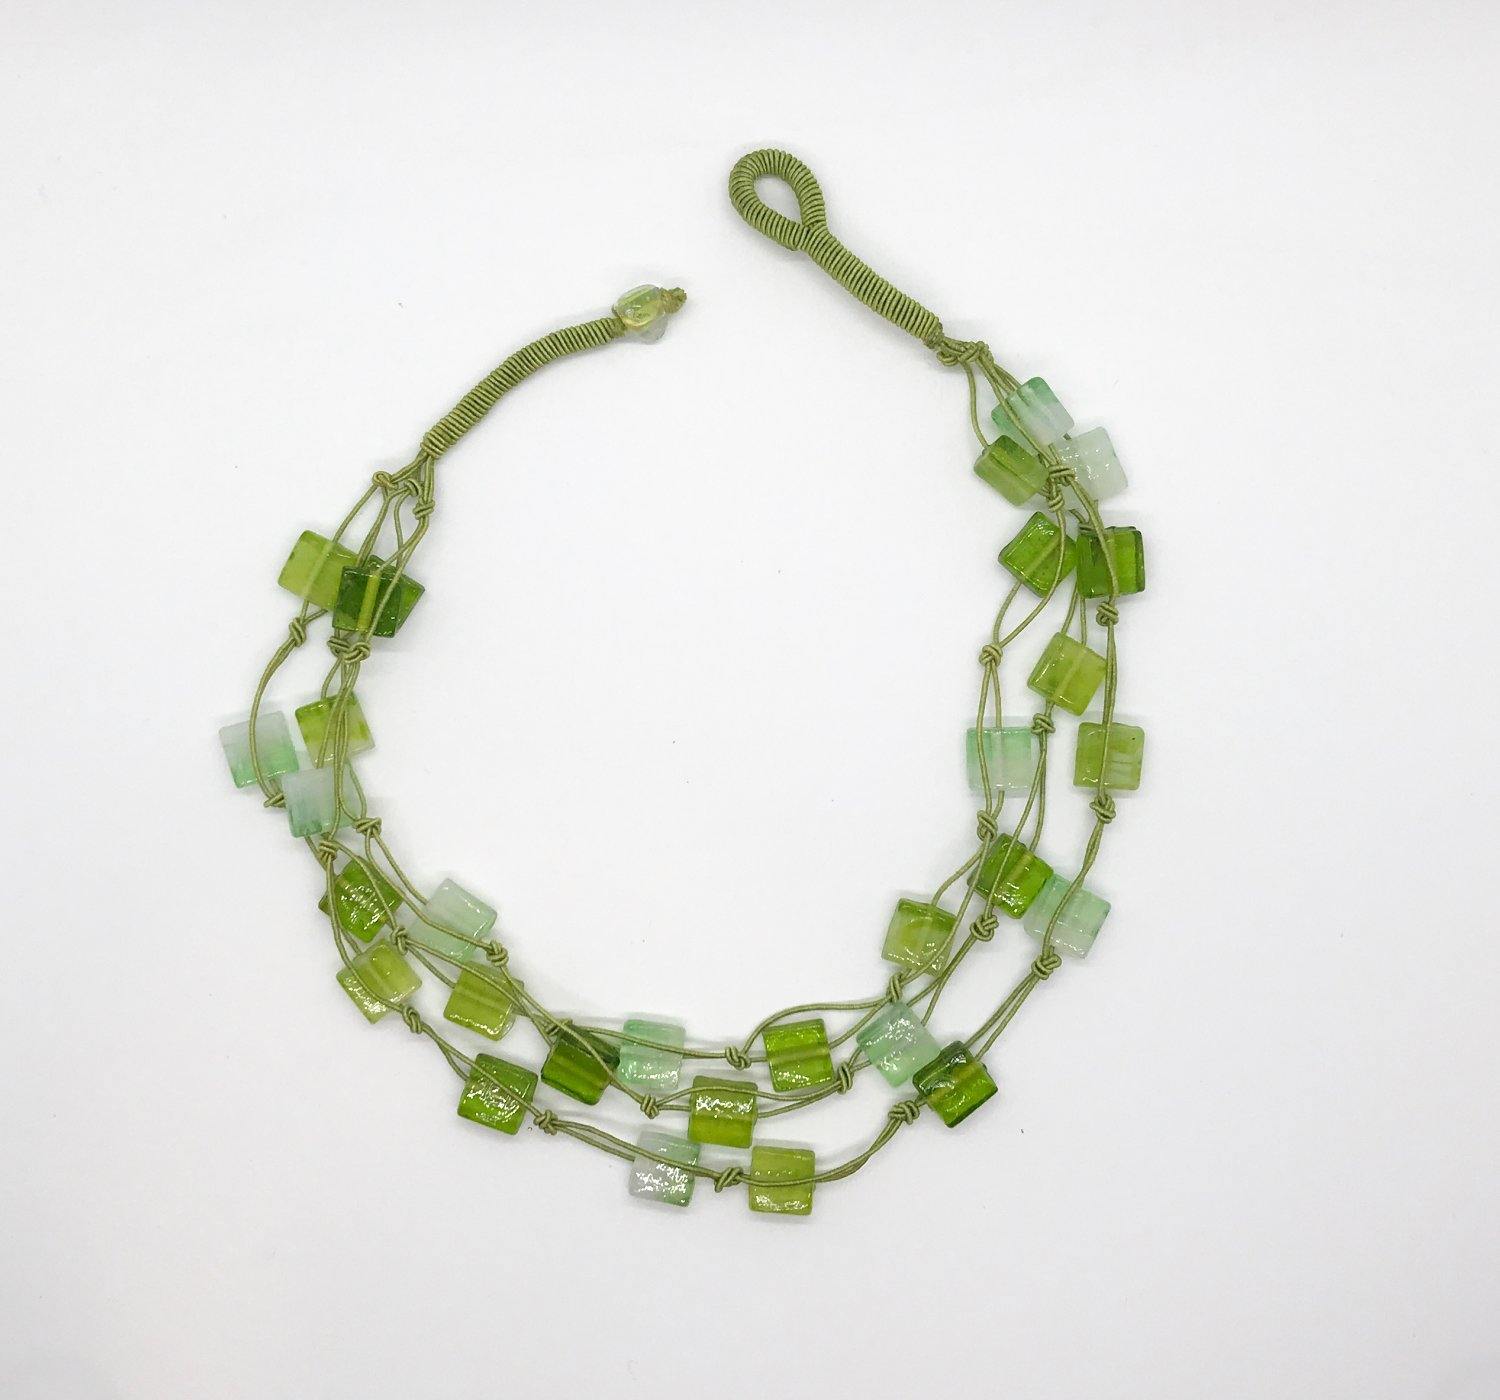 Vintage Three Stand Green Lucite Square Beads Necklace - Lamoree’s Vintage